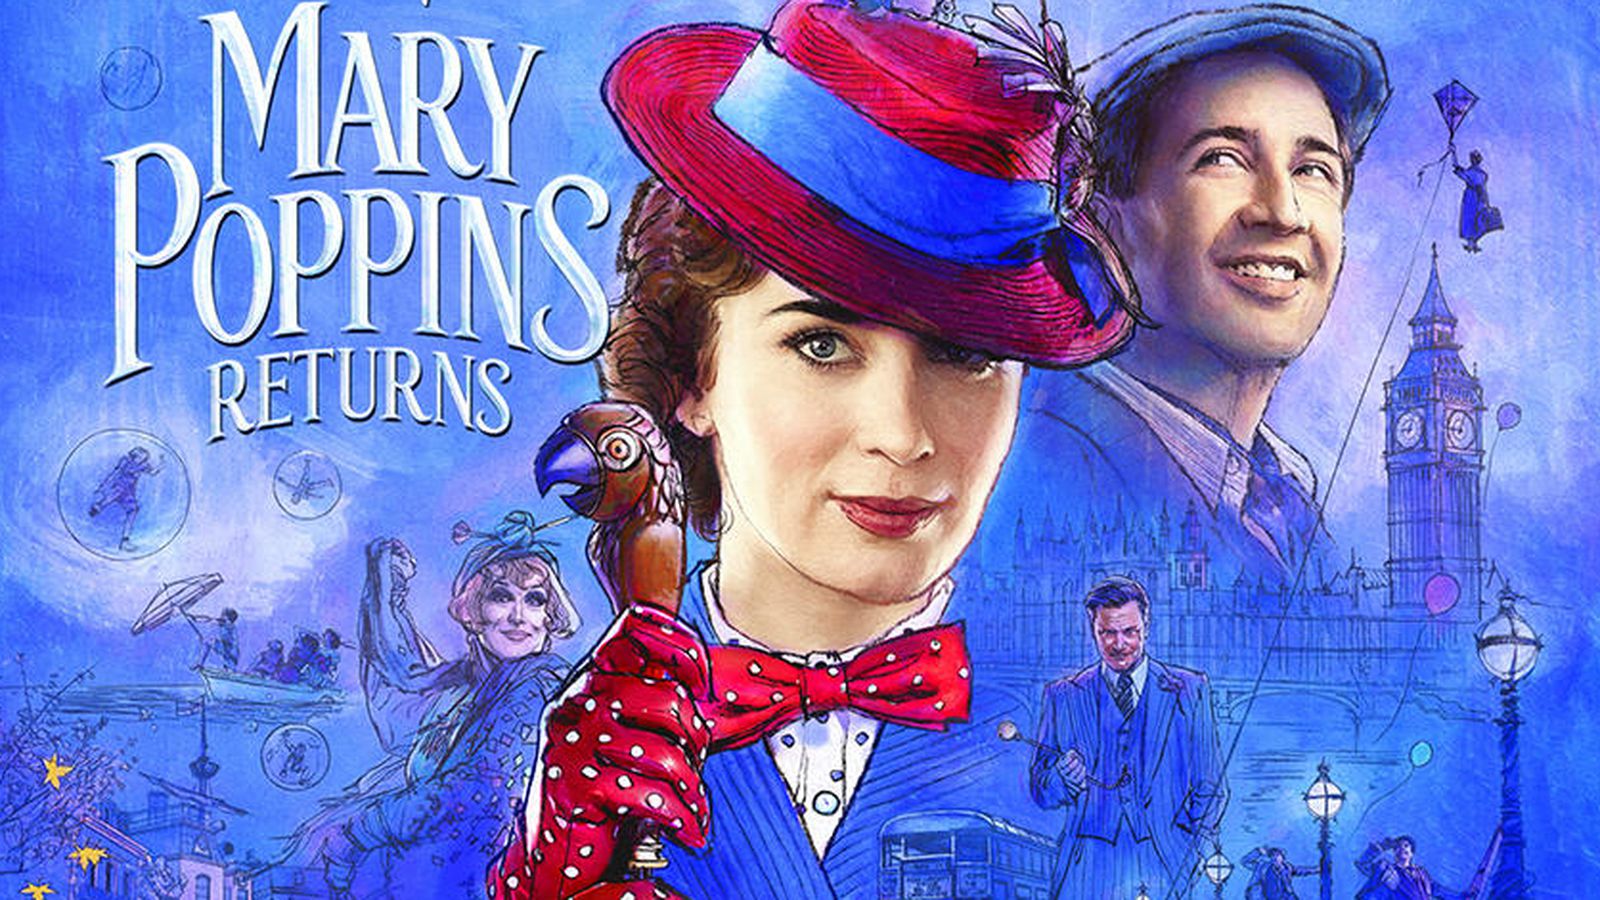 Mary Poppins Returns Trailer Flies In With Old Fashioned